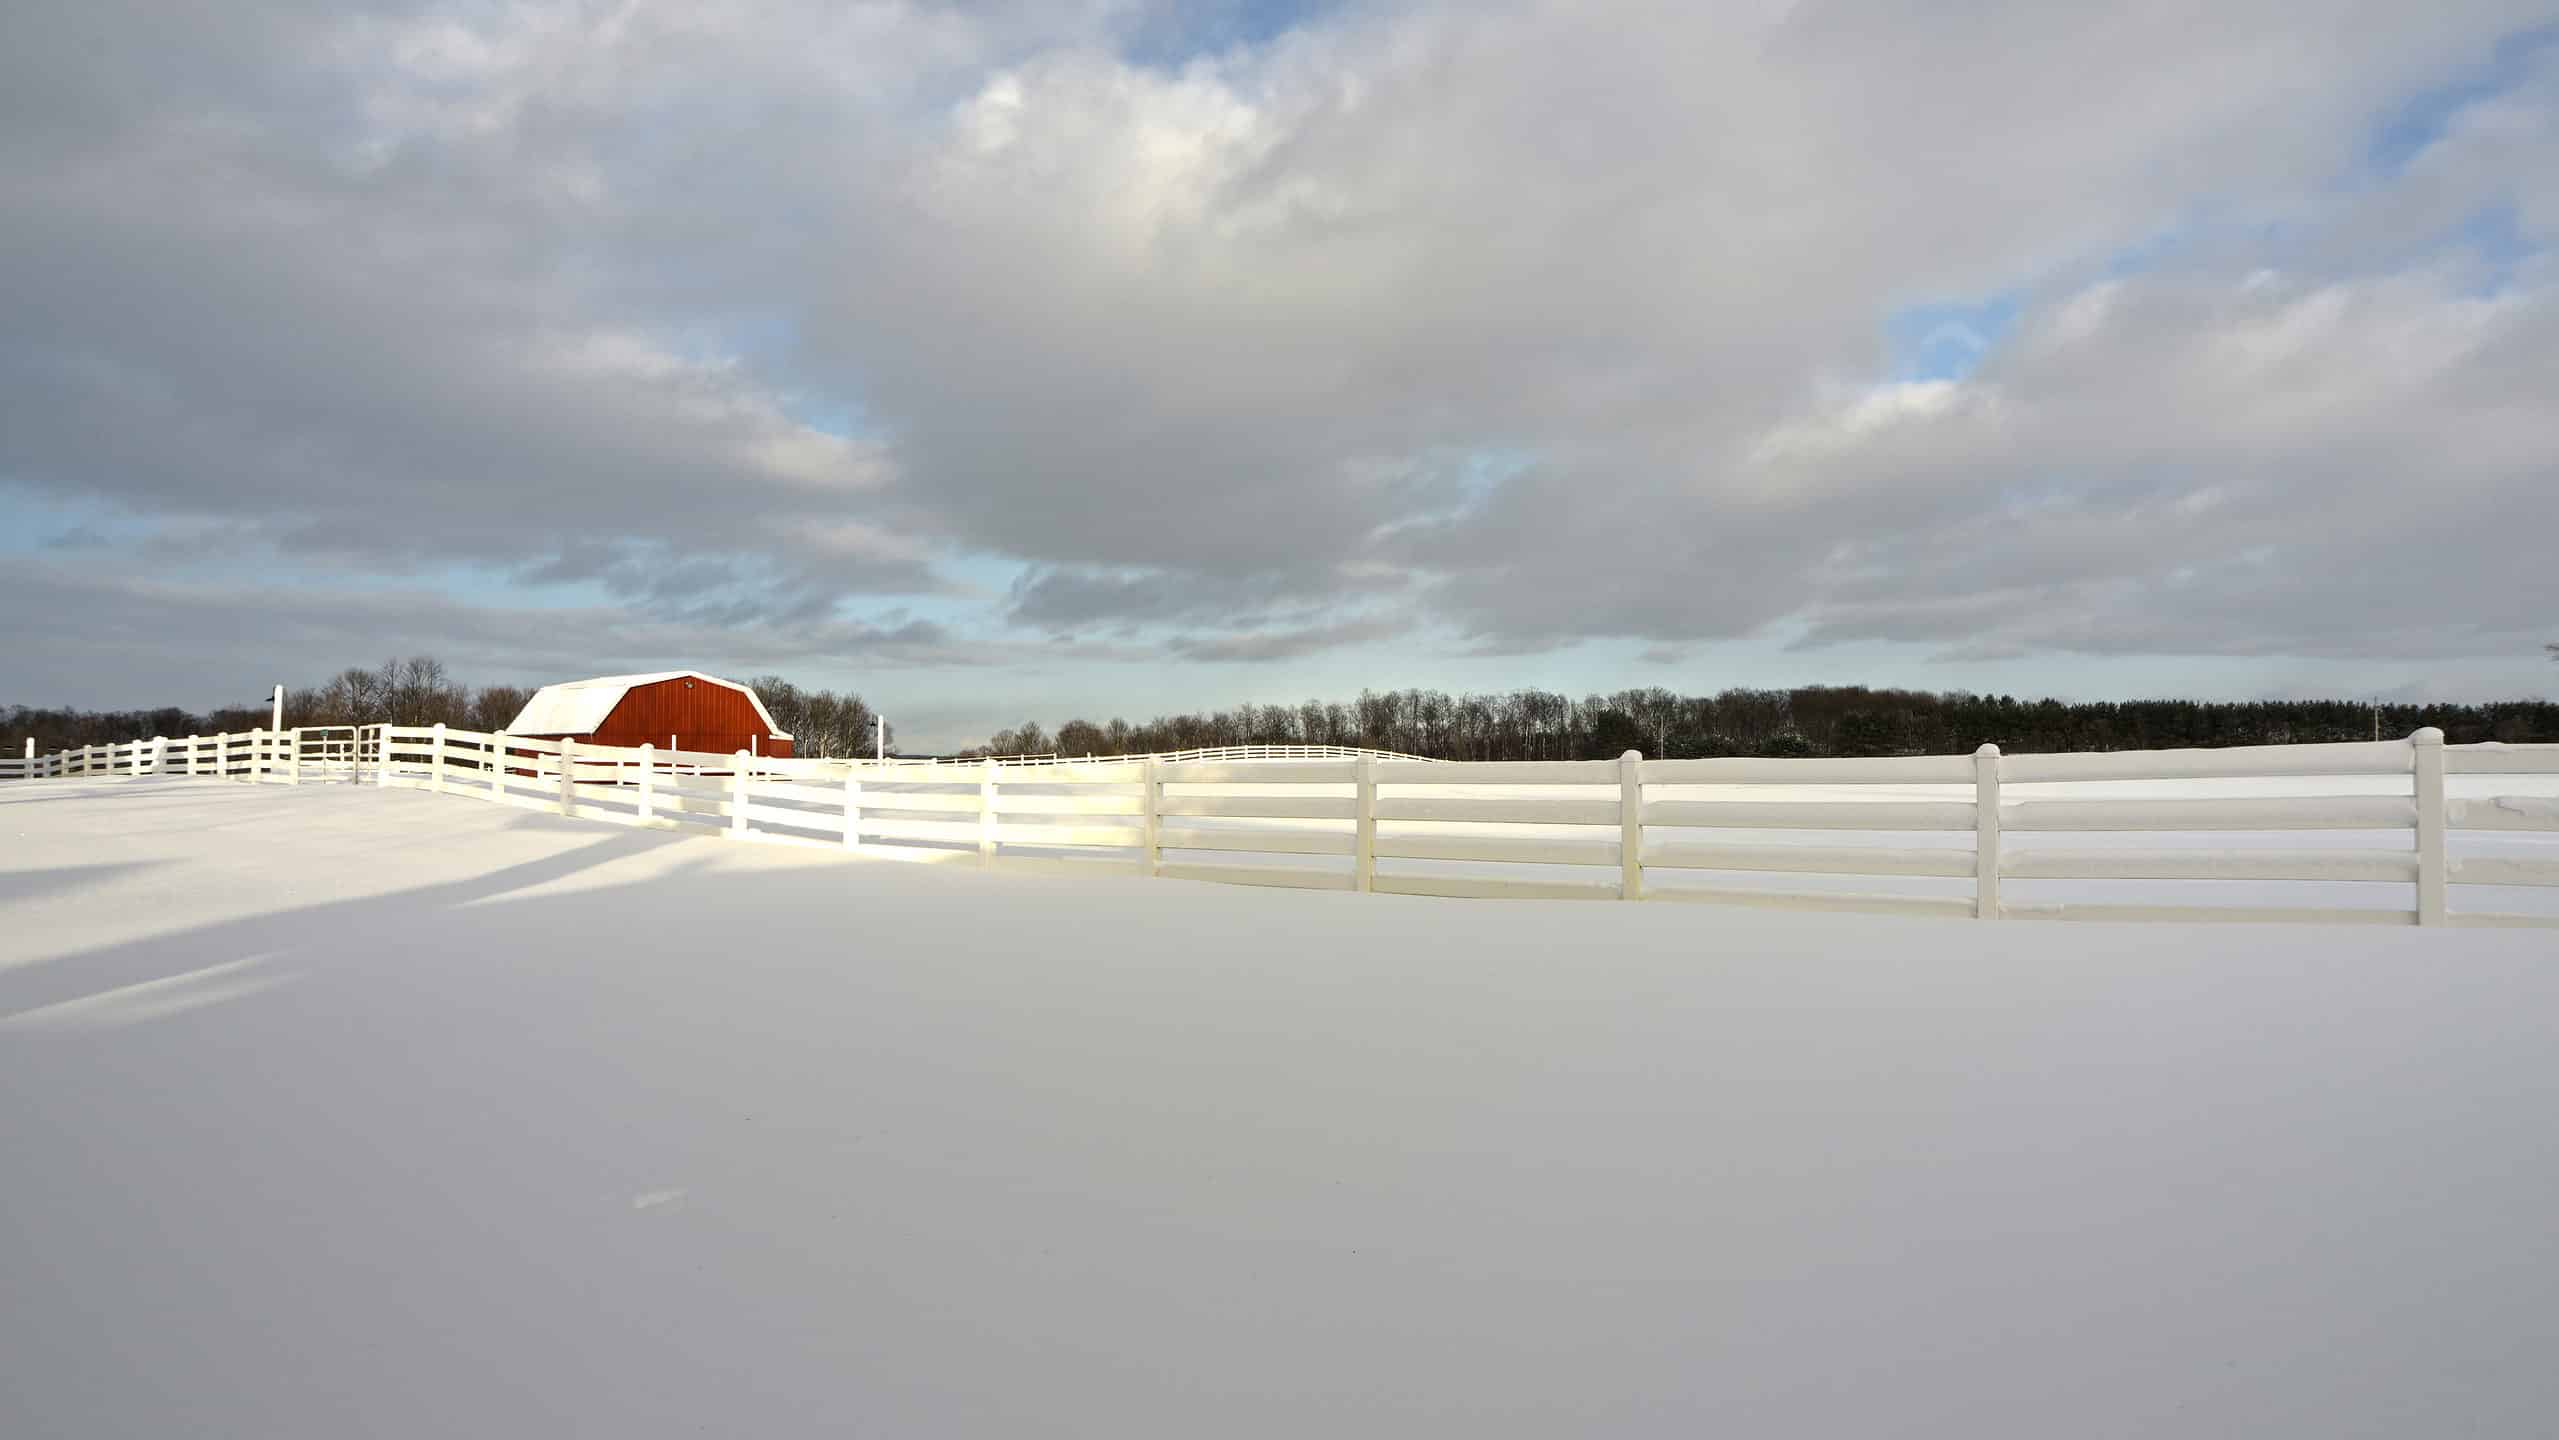 Field Covered in Snow in Gaylord, Michigan - Coldest Temperature Ever Recorded in Michigan